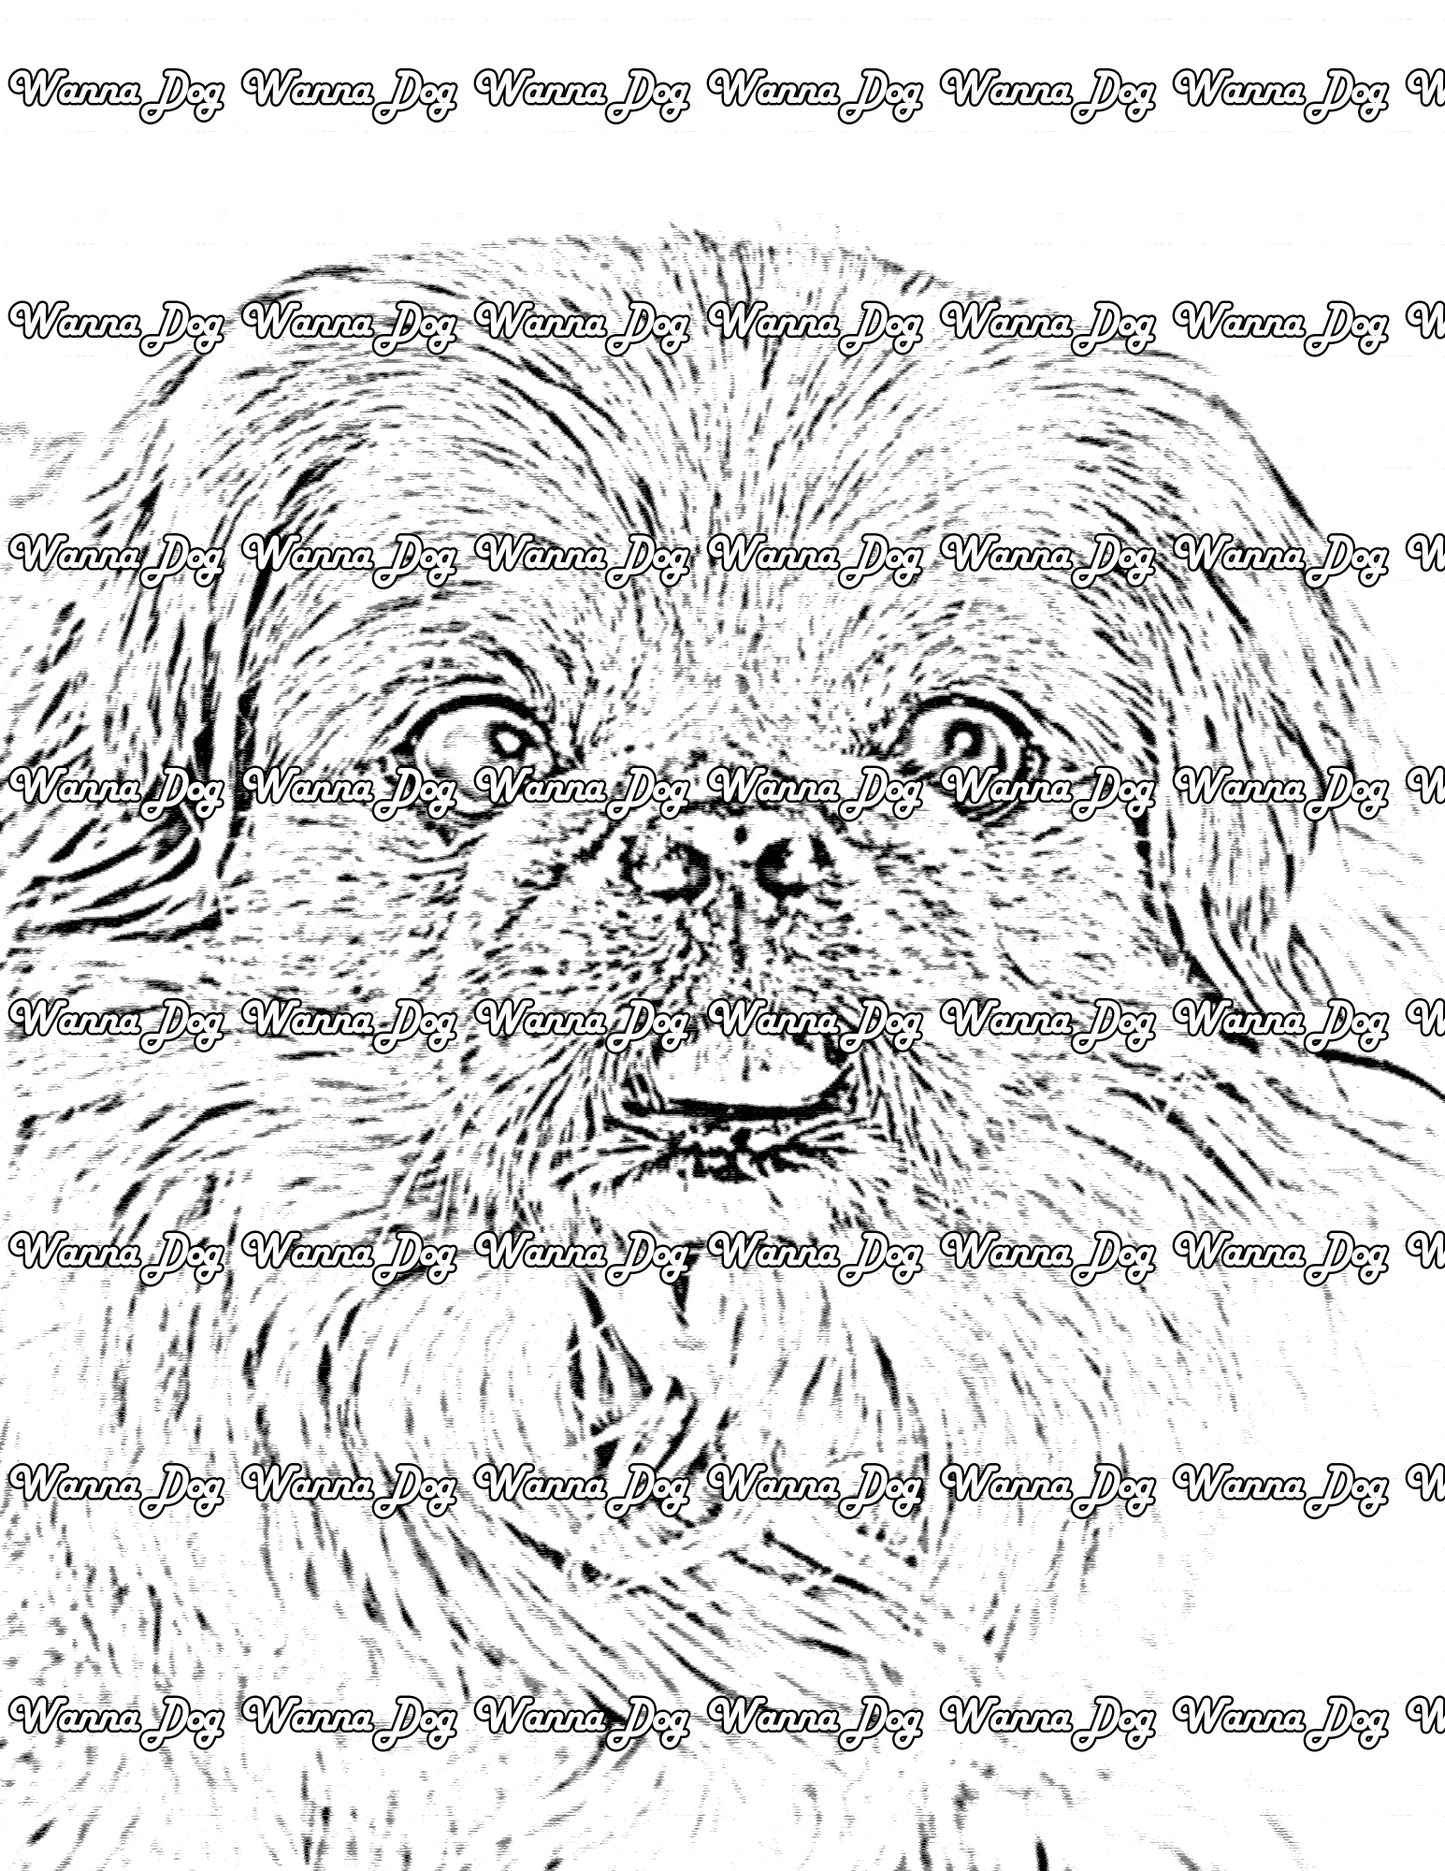 Pekingese Coloring Page of a Pekingese close up with their tongue out